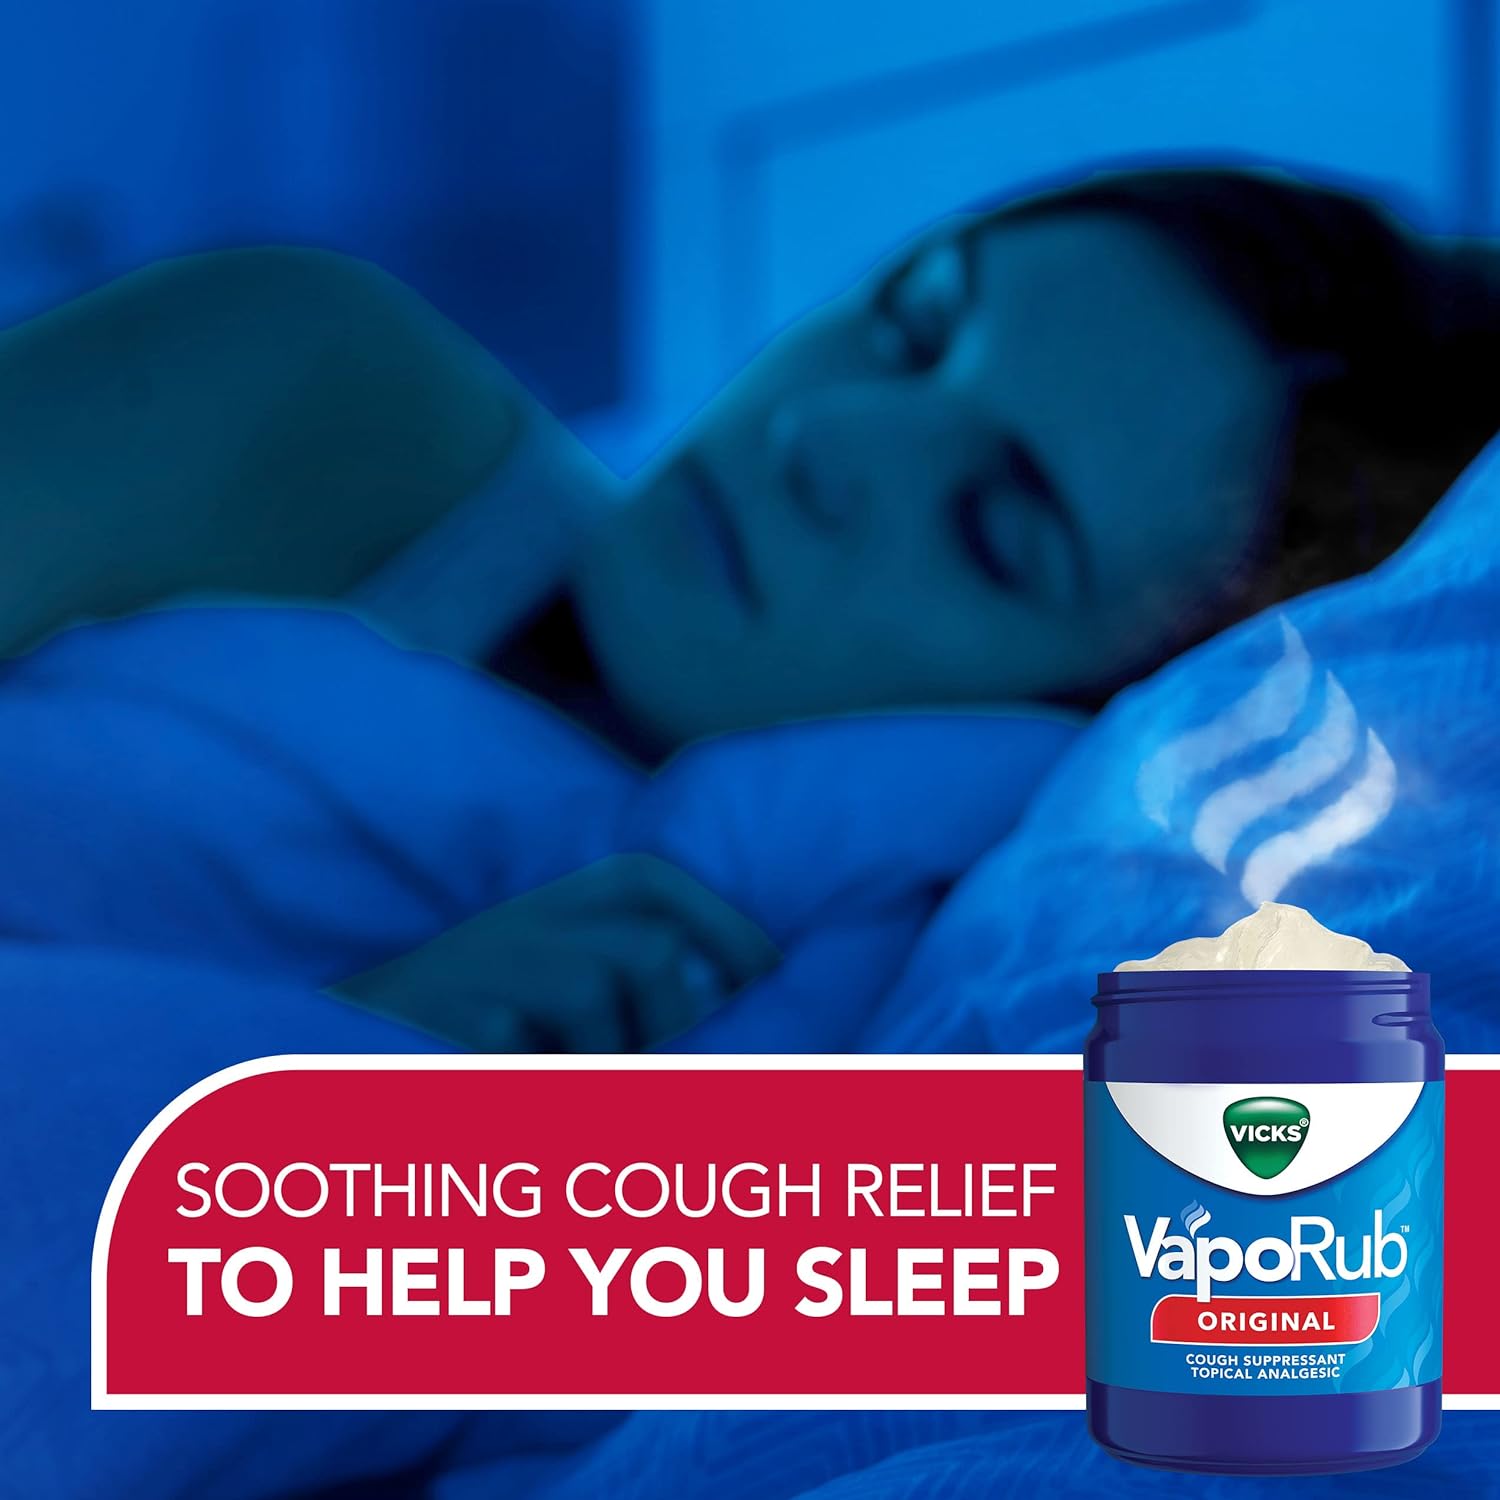 Vicks VapoRub, Chest Rub Ointment, Relief from Cough, Cold, Aches, & Pains with Original Medicated Vicks Vapors, Topical Cough Suppressant, 1.76 Ounce (Pack of 3) : Everything Else